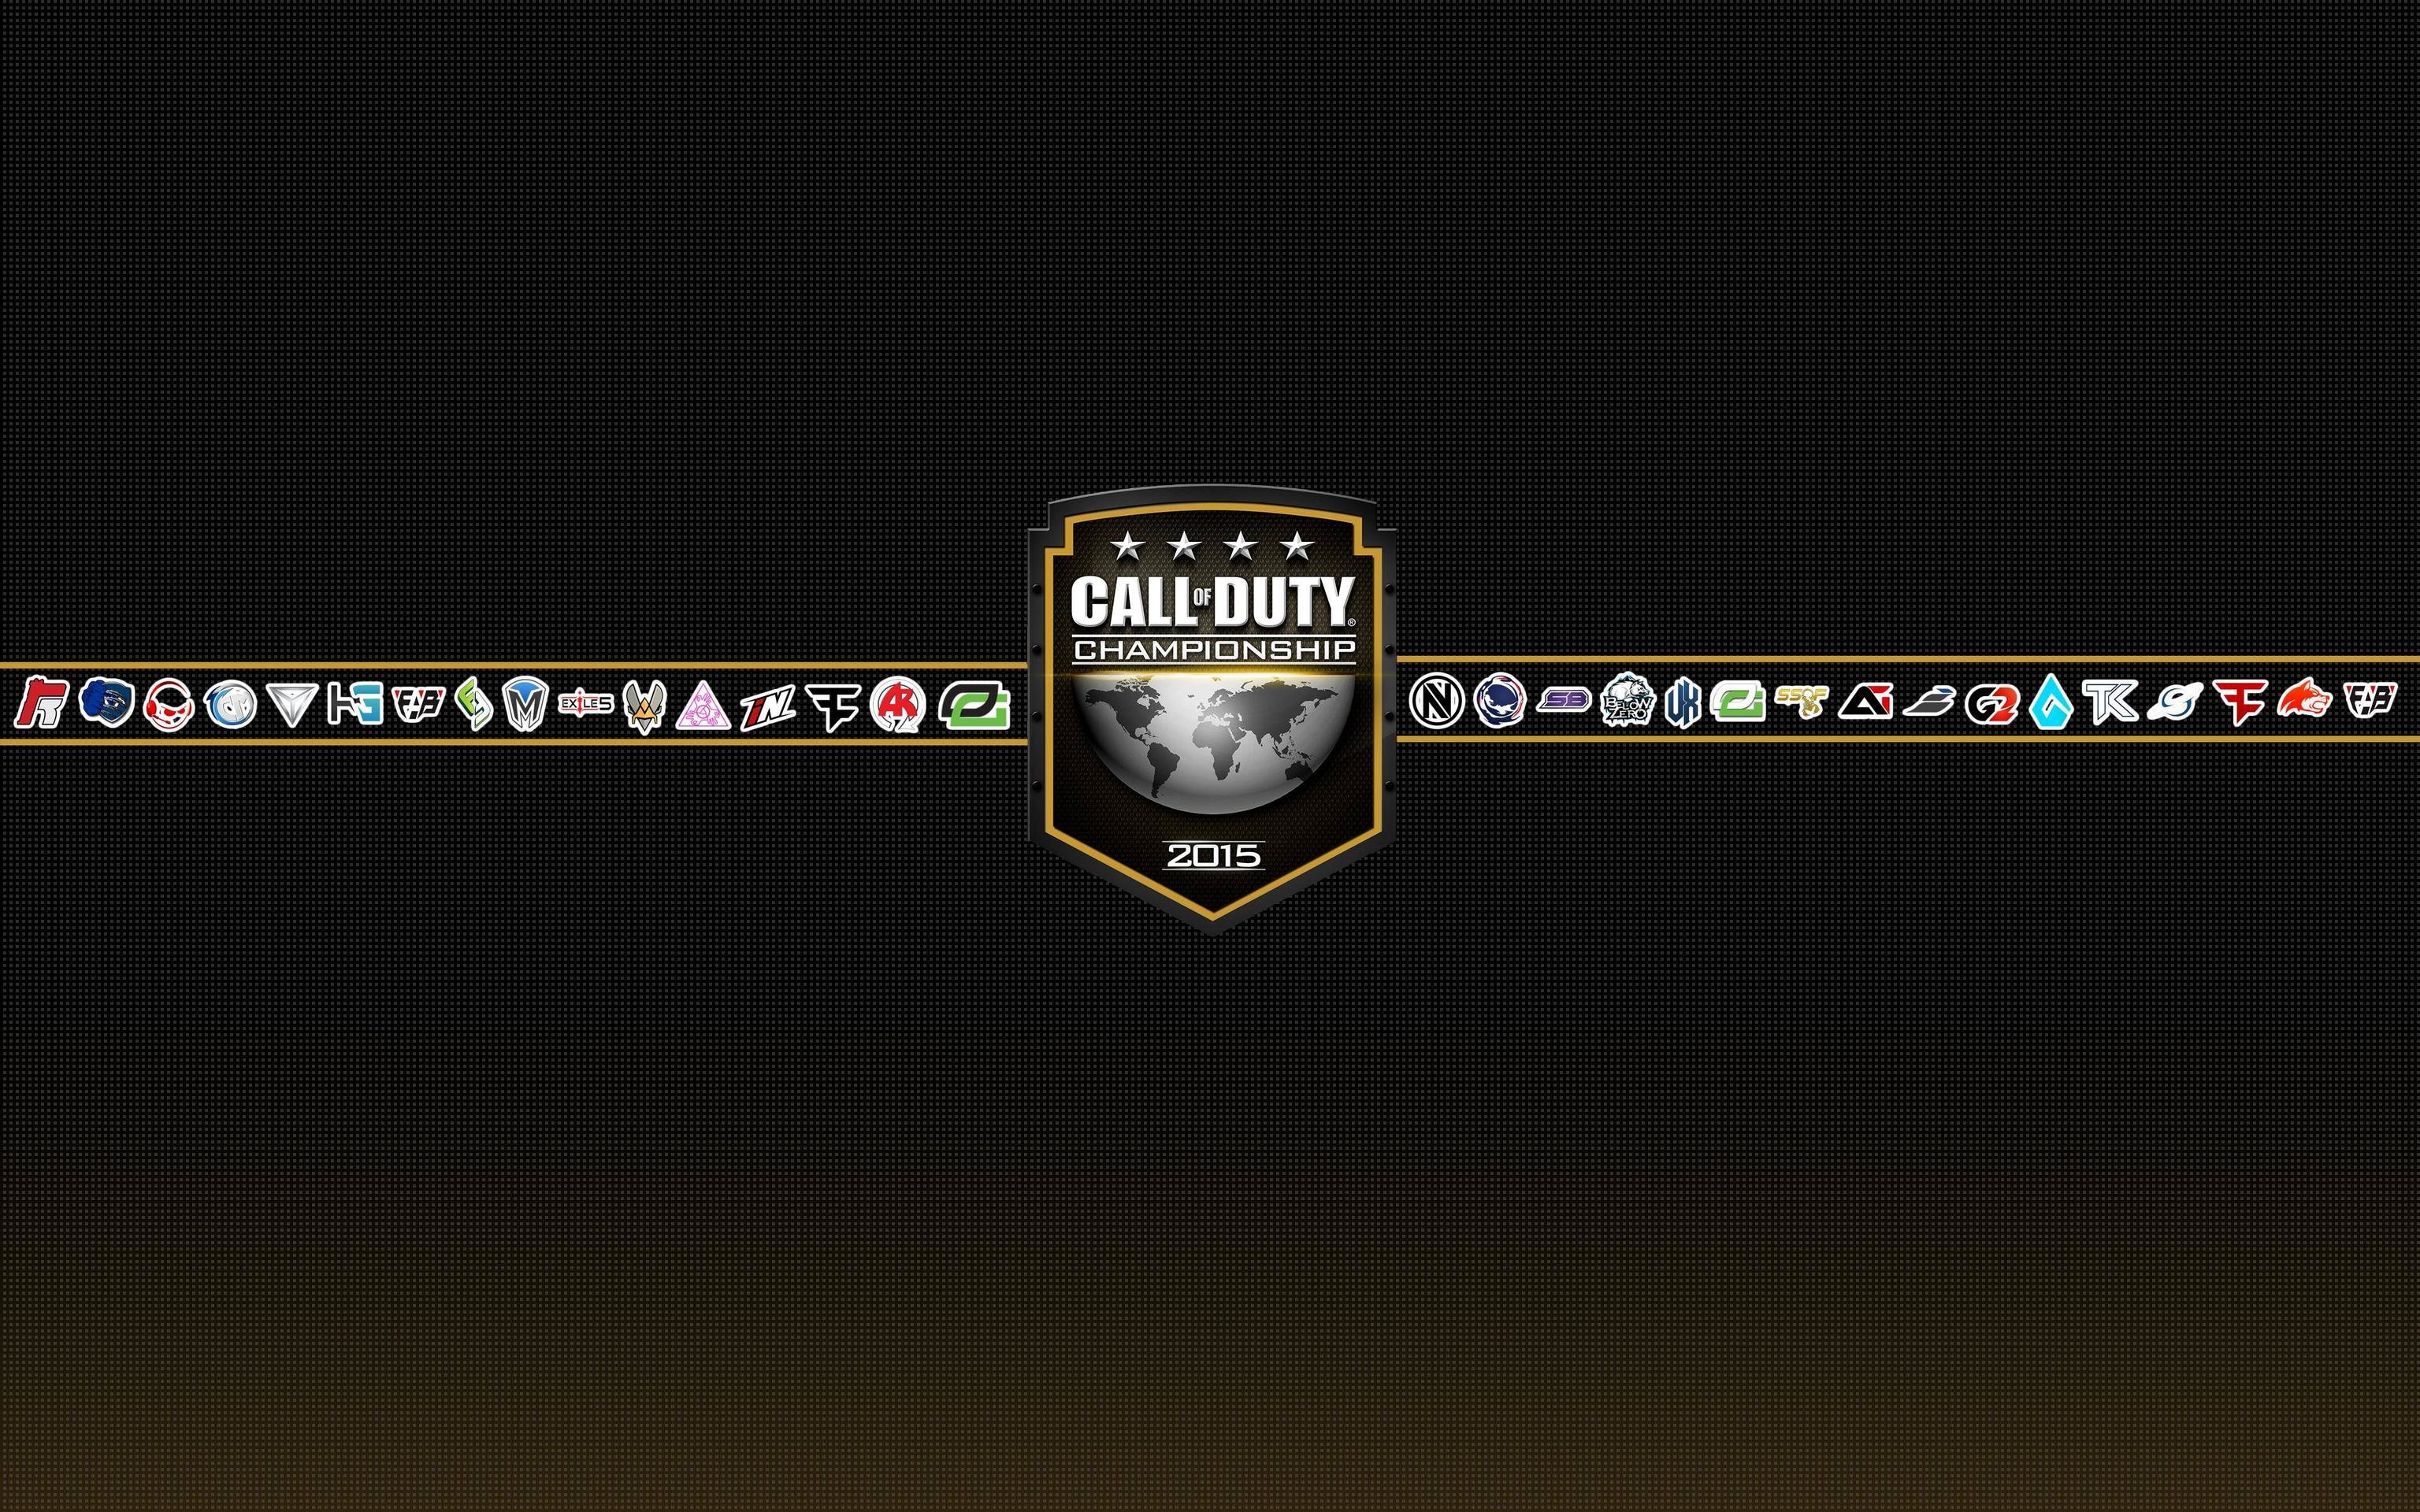 3072x Quick Cod Champs Wallpaper For Y All Of Duty